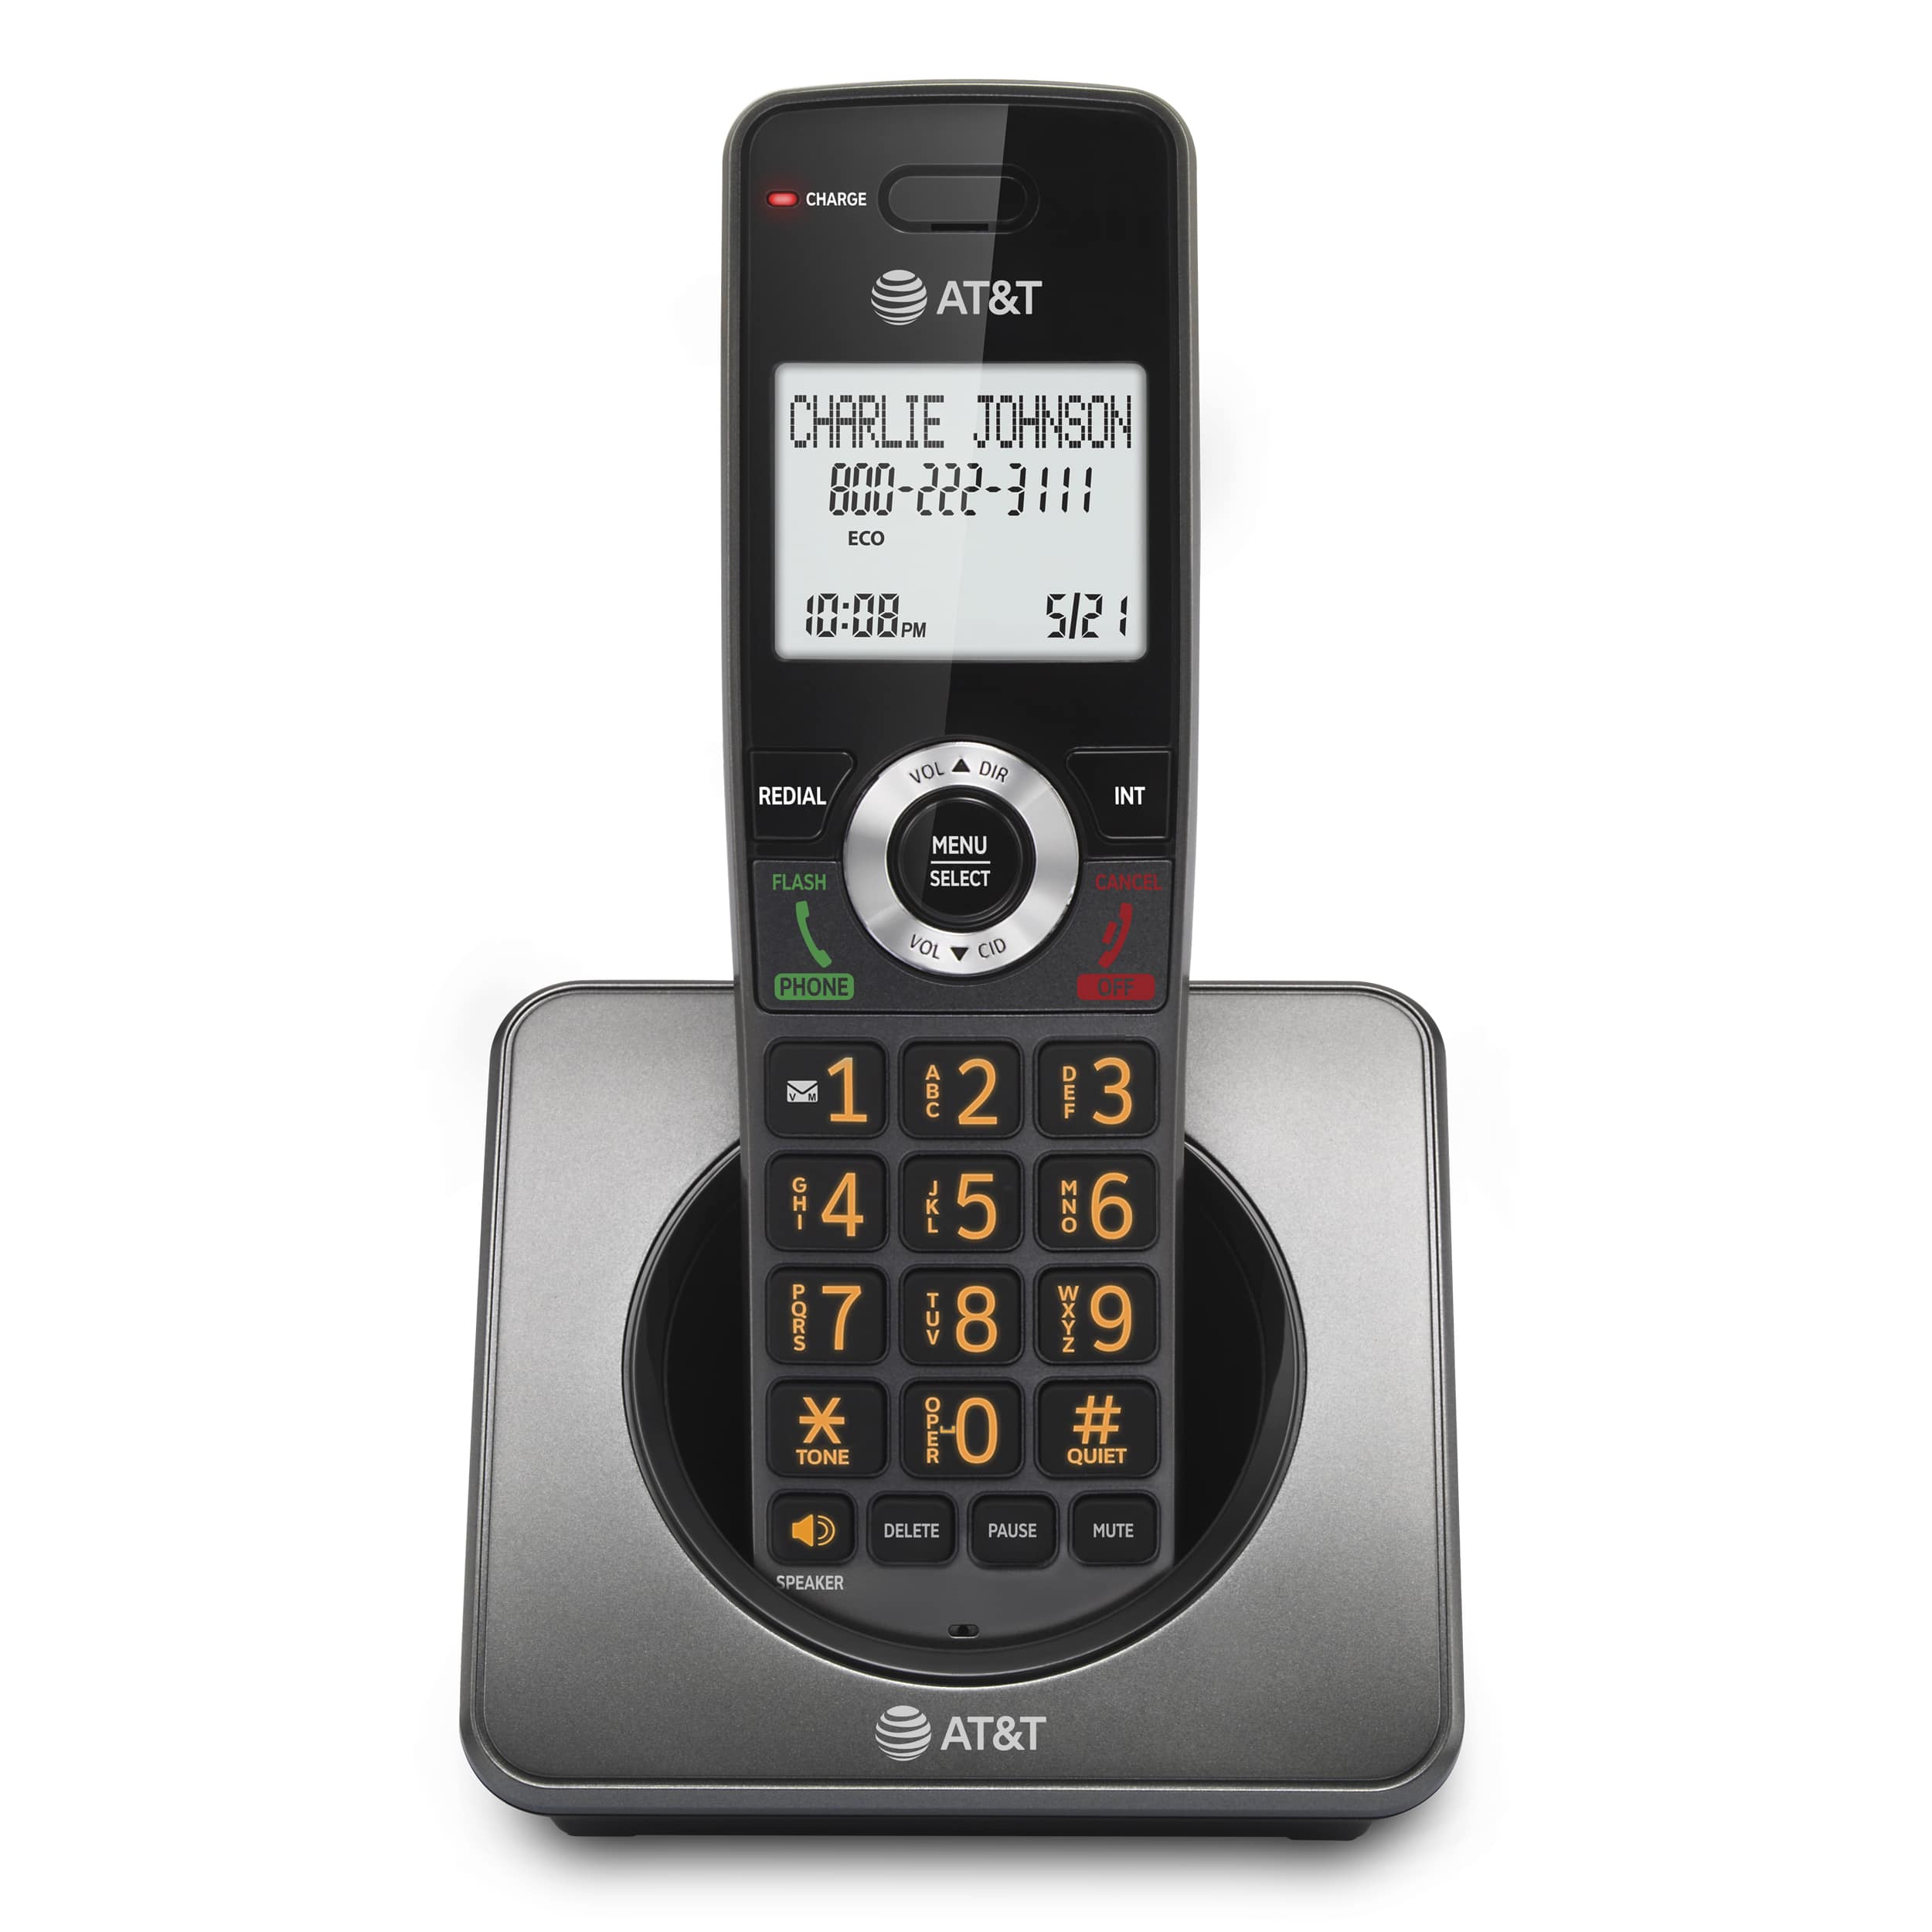 Cordless Home Phone with Call Block (Graphite & Black) - view 1